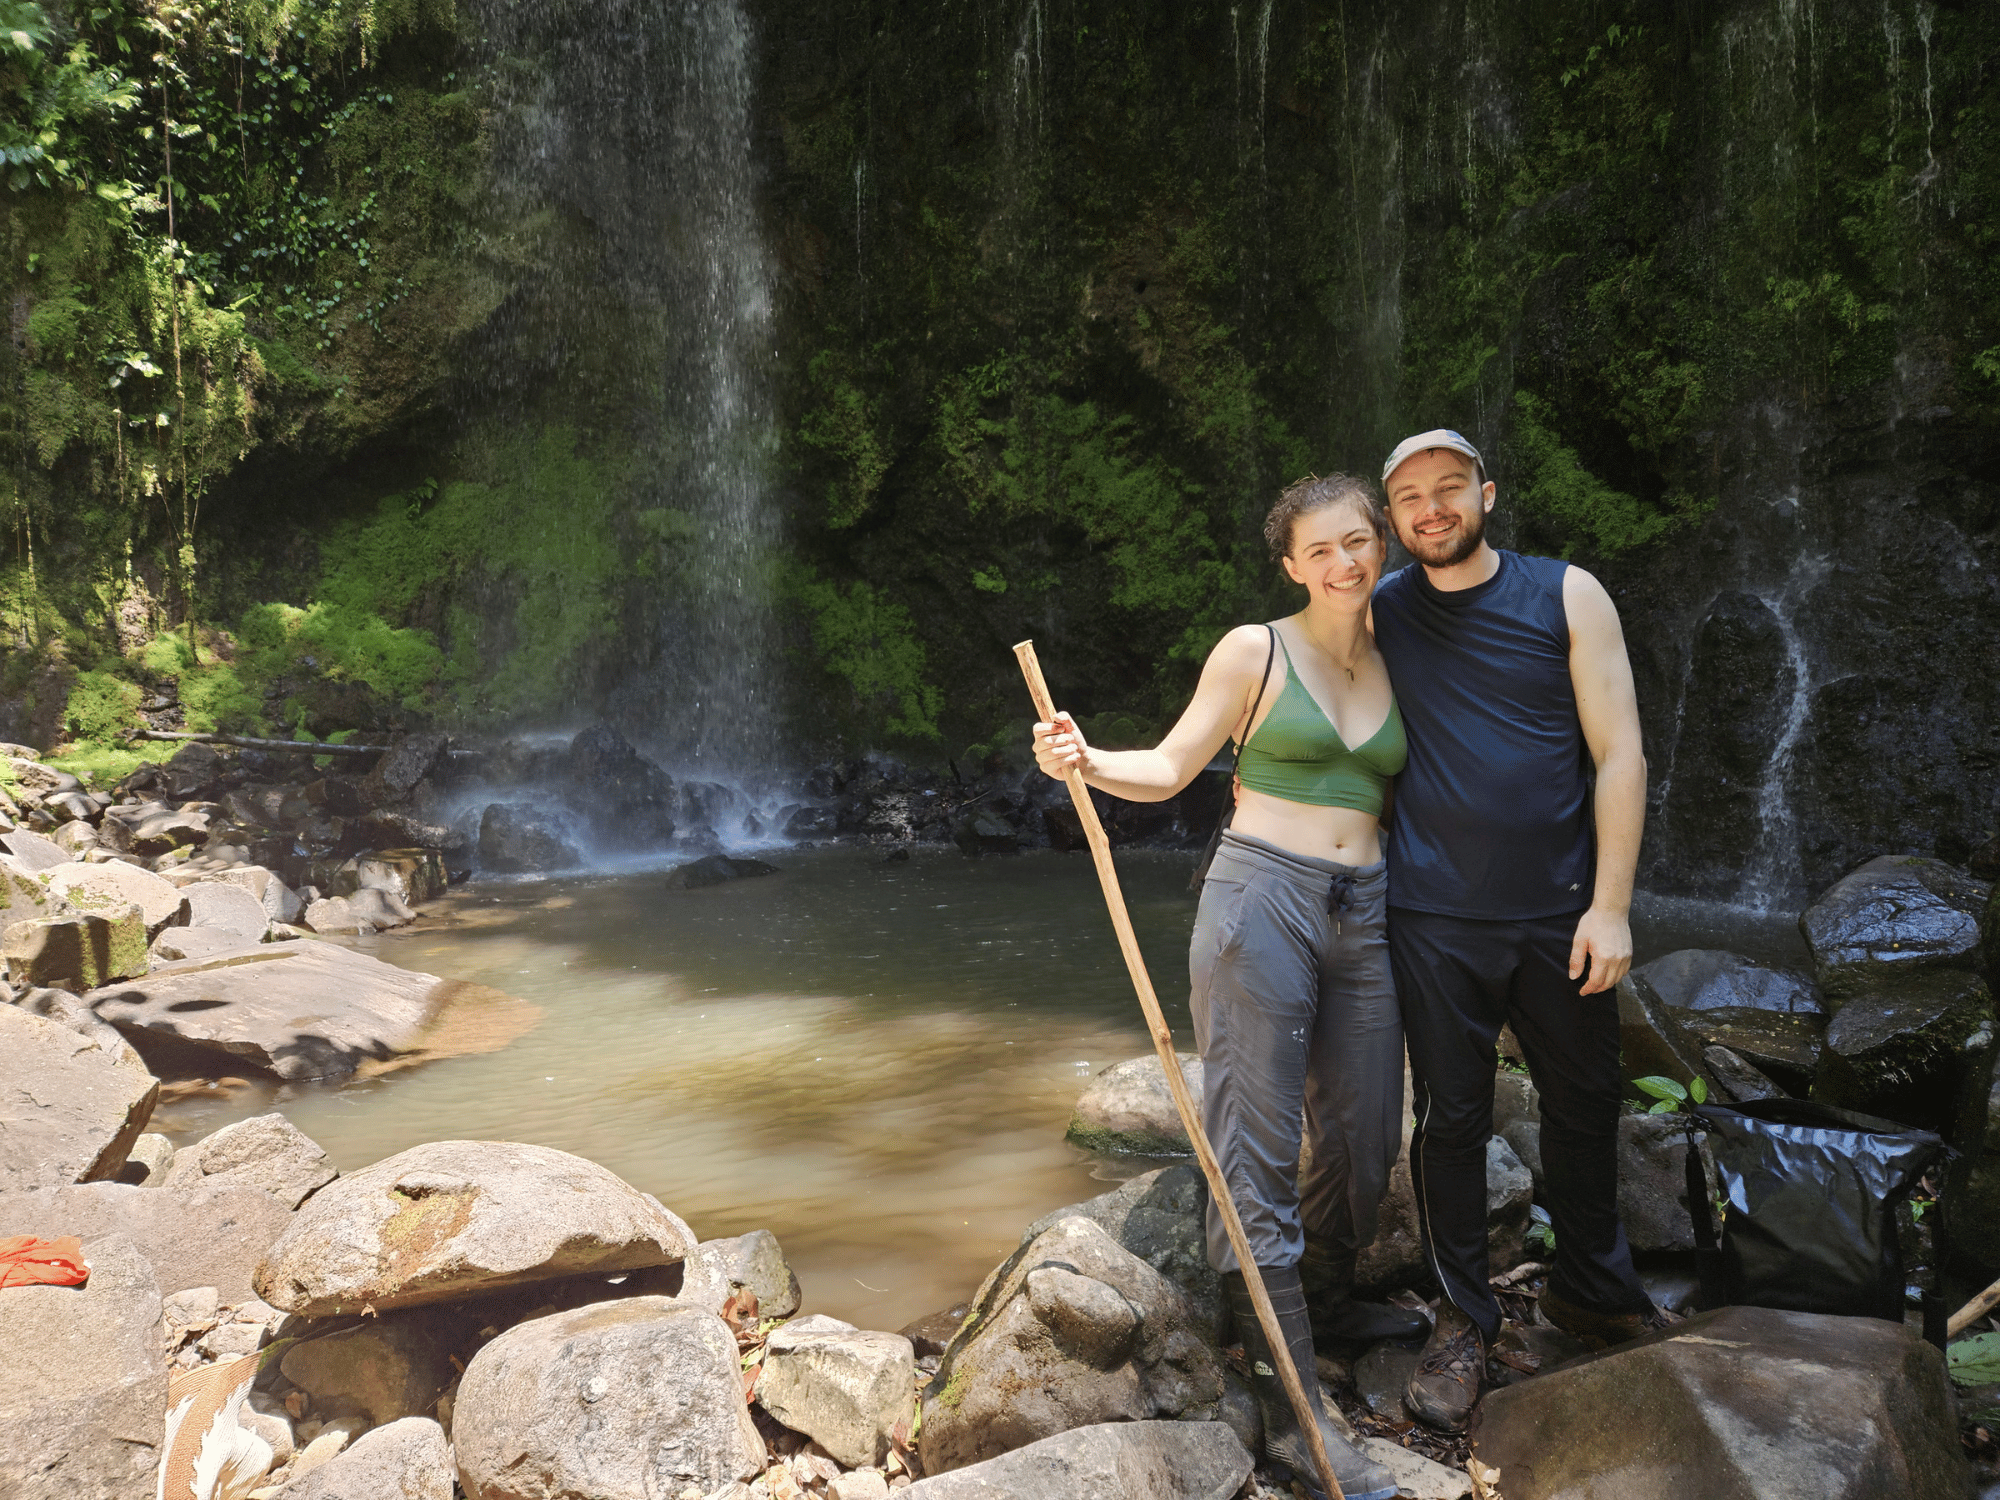 Daniel and Liv standing next to a waterfall and swimming hole.